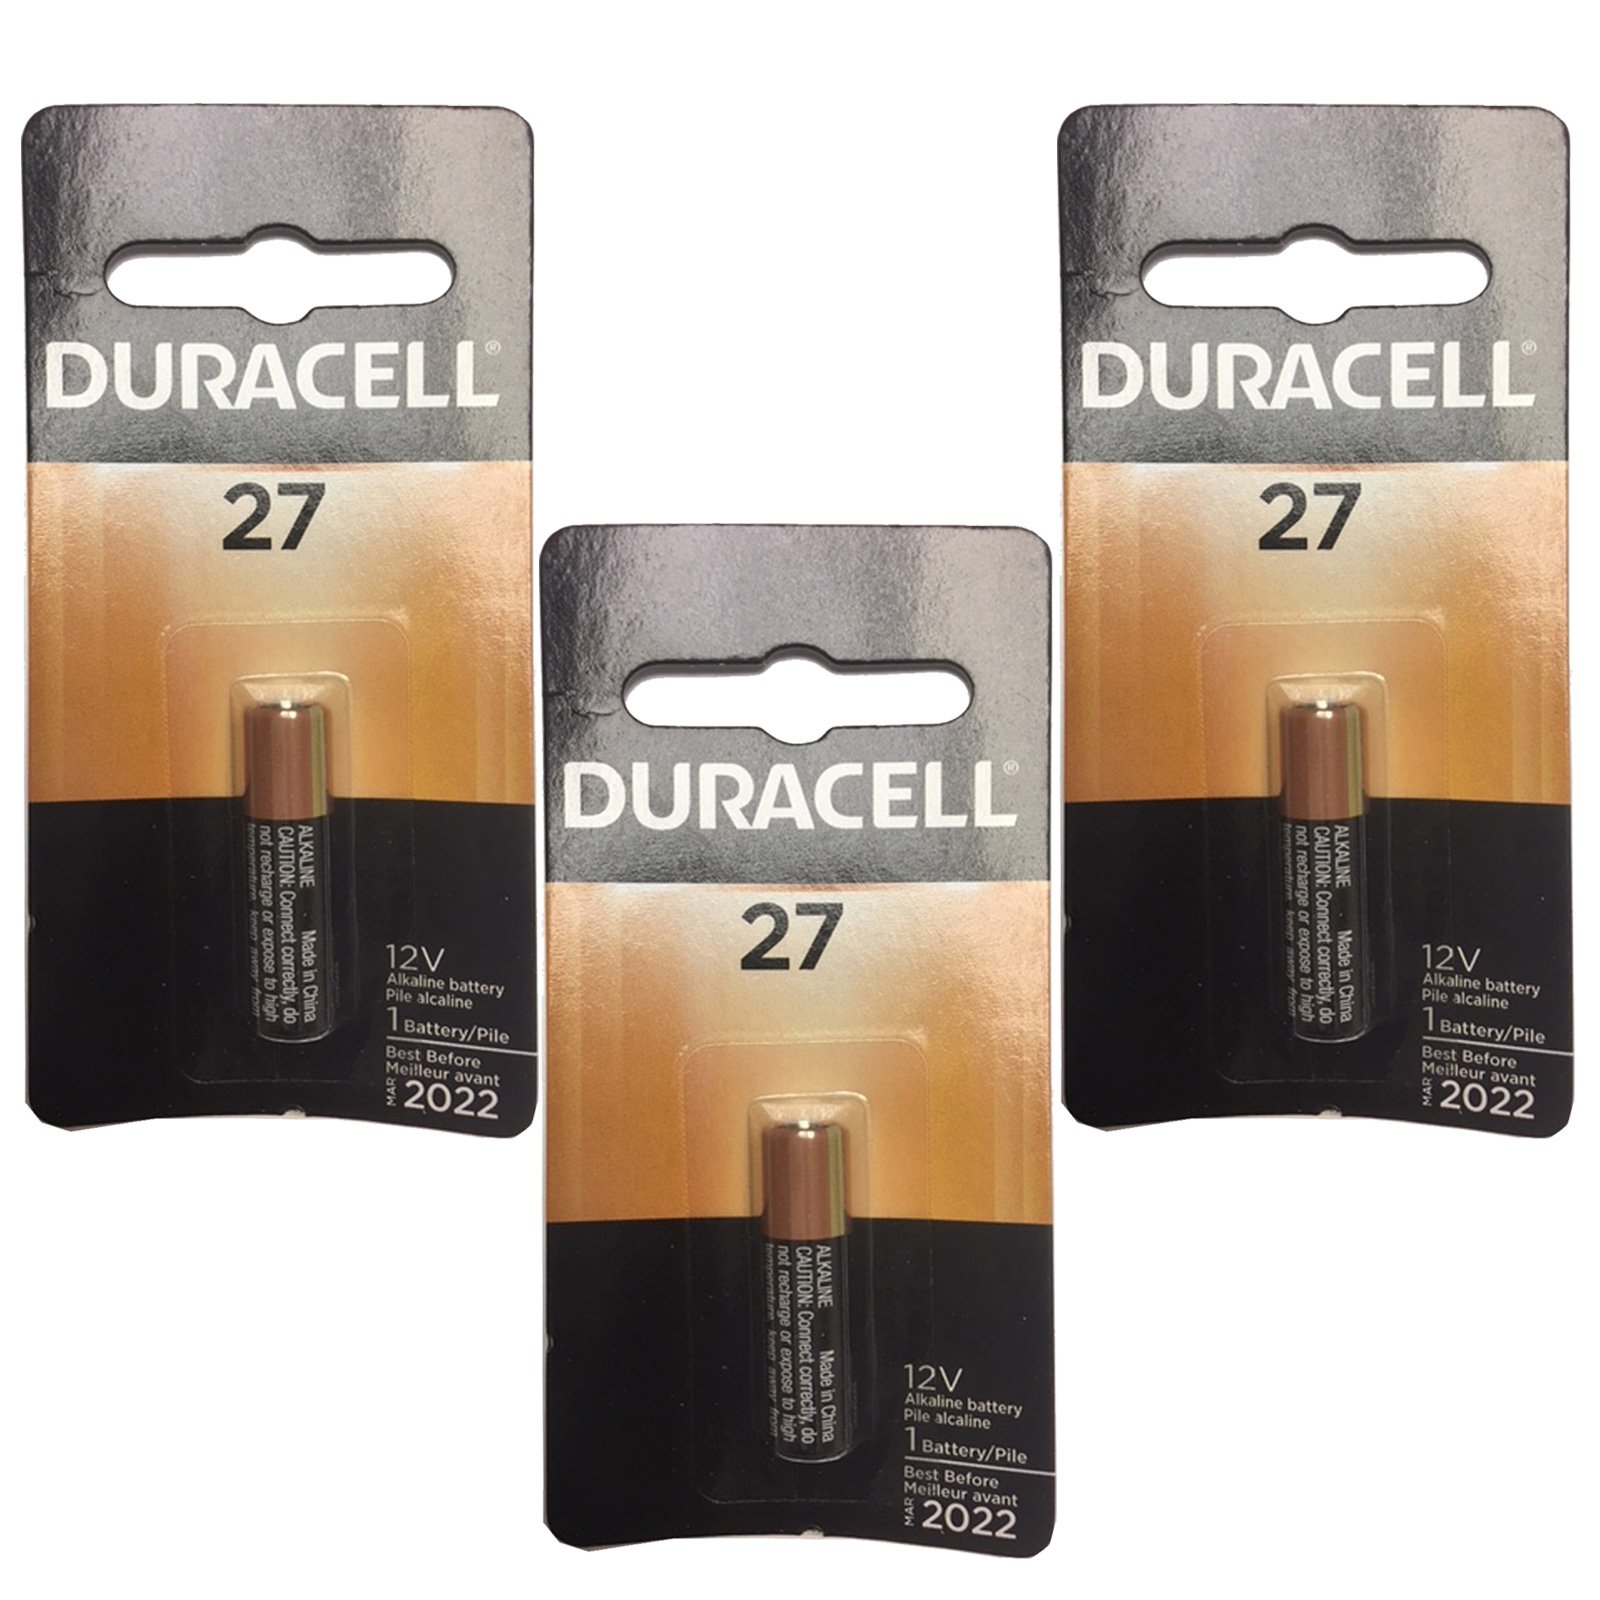 DURACELL 3X MN27 Alkaline 12V Battery Garage Openers Keyless Remotes Fobs